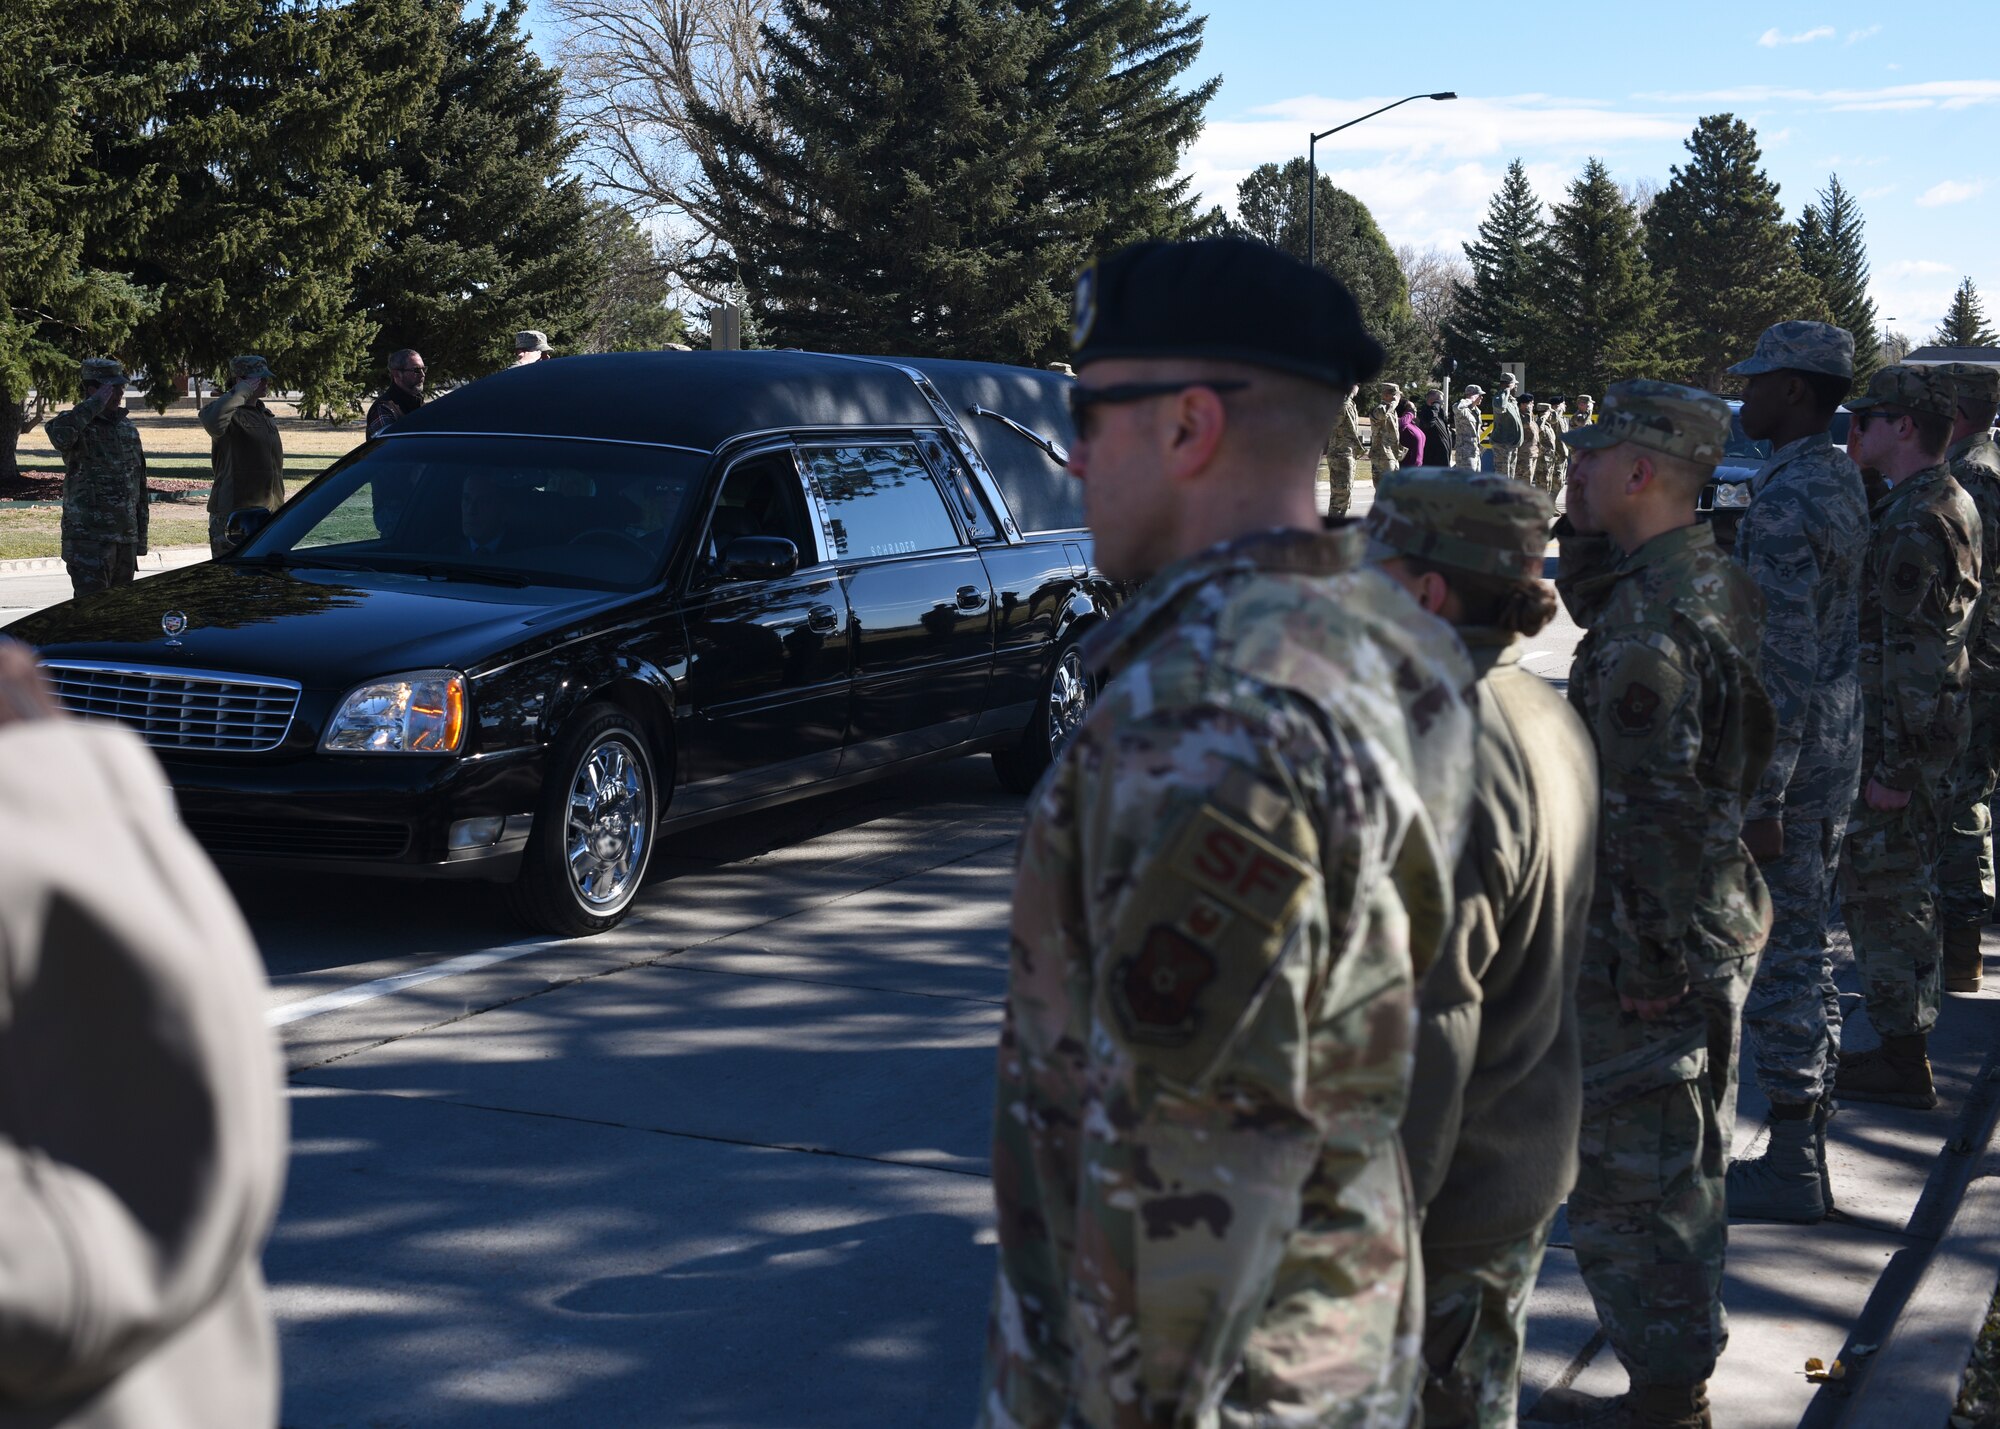 Airmen and staff members give retired Master Sgt. Robert Meadows a final salute as he enters the base for the last time on Oct. 22, 2019, on F.E. Warren Air Force Base, Wyo. Meadows served 20 years in the Air Force, retiring from the 1381st Geodetic Survey Squadron in 1966.(U.S. Air Force photo by Staff Sgt. Ashley N. Sokolov)